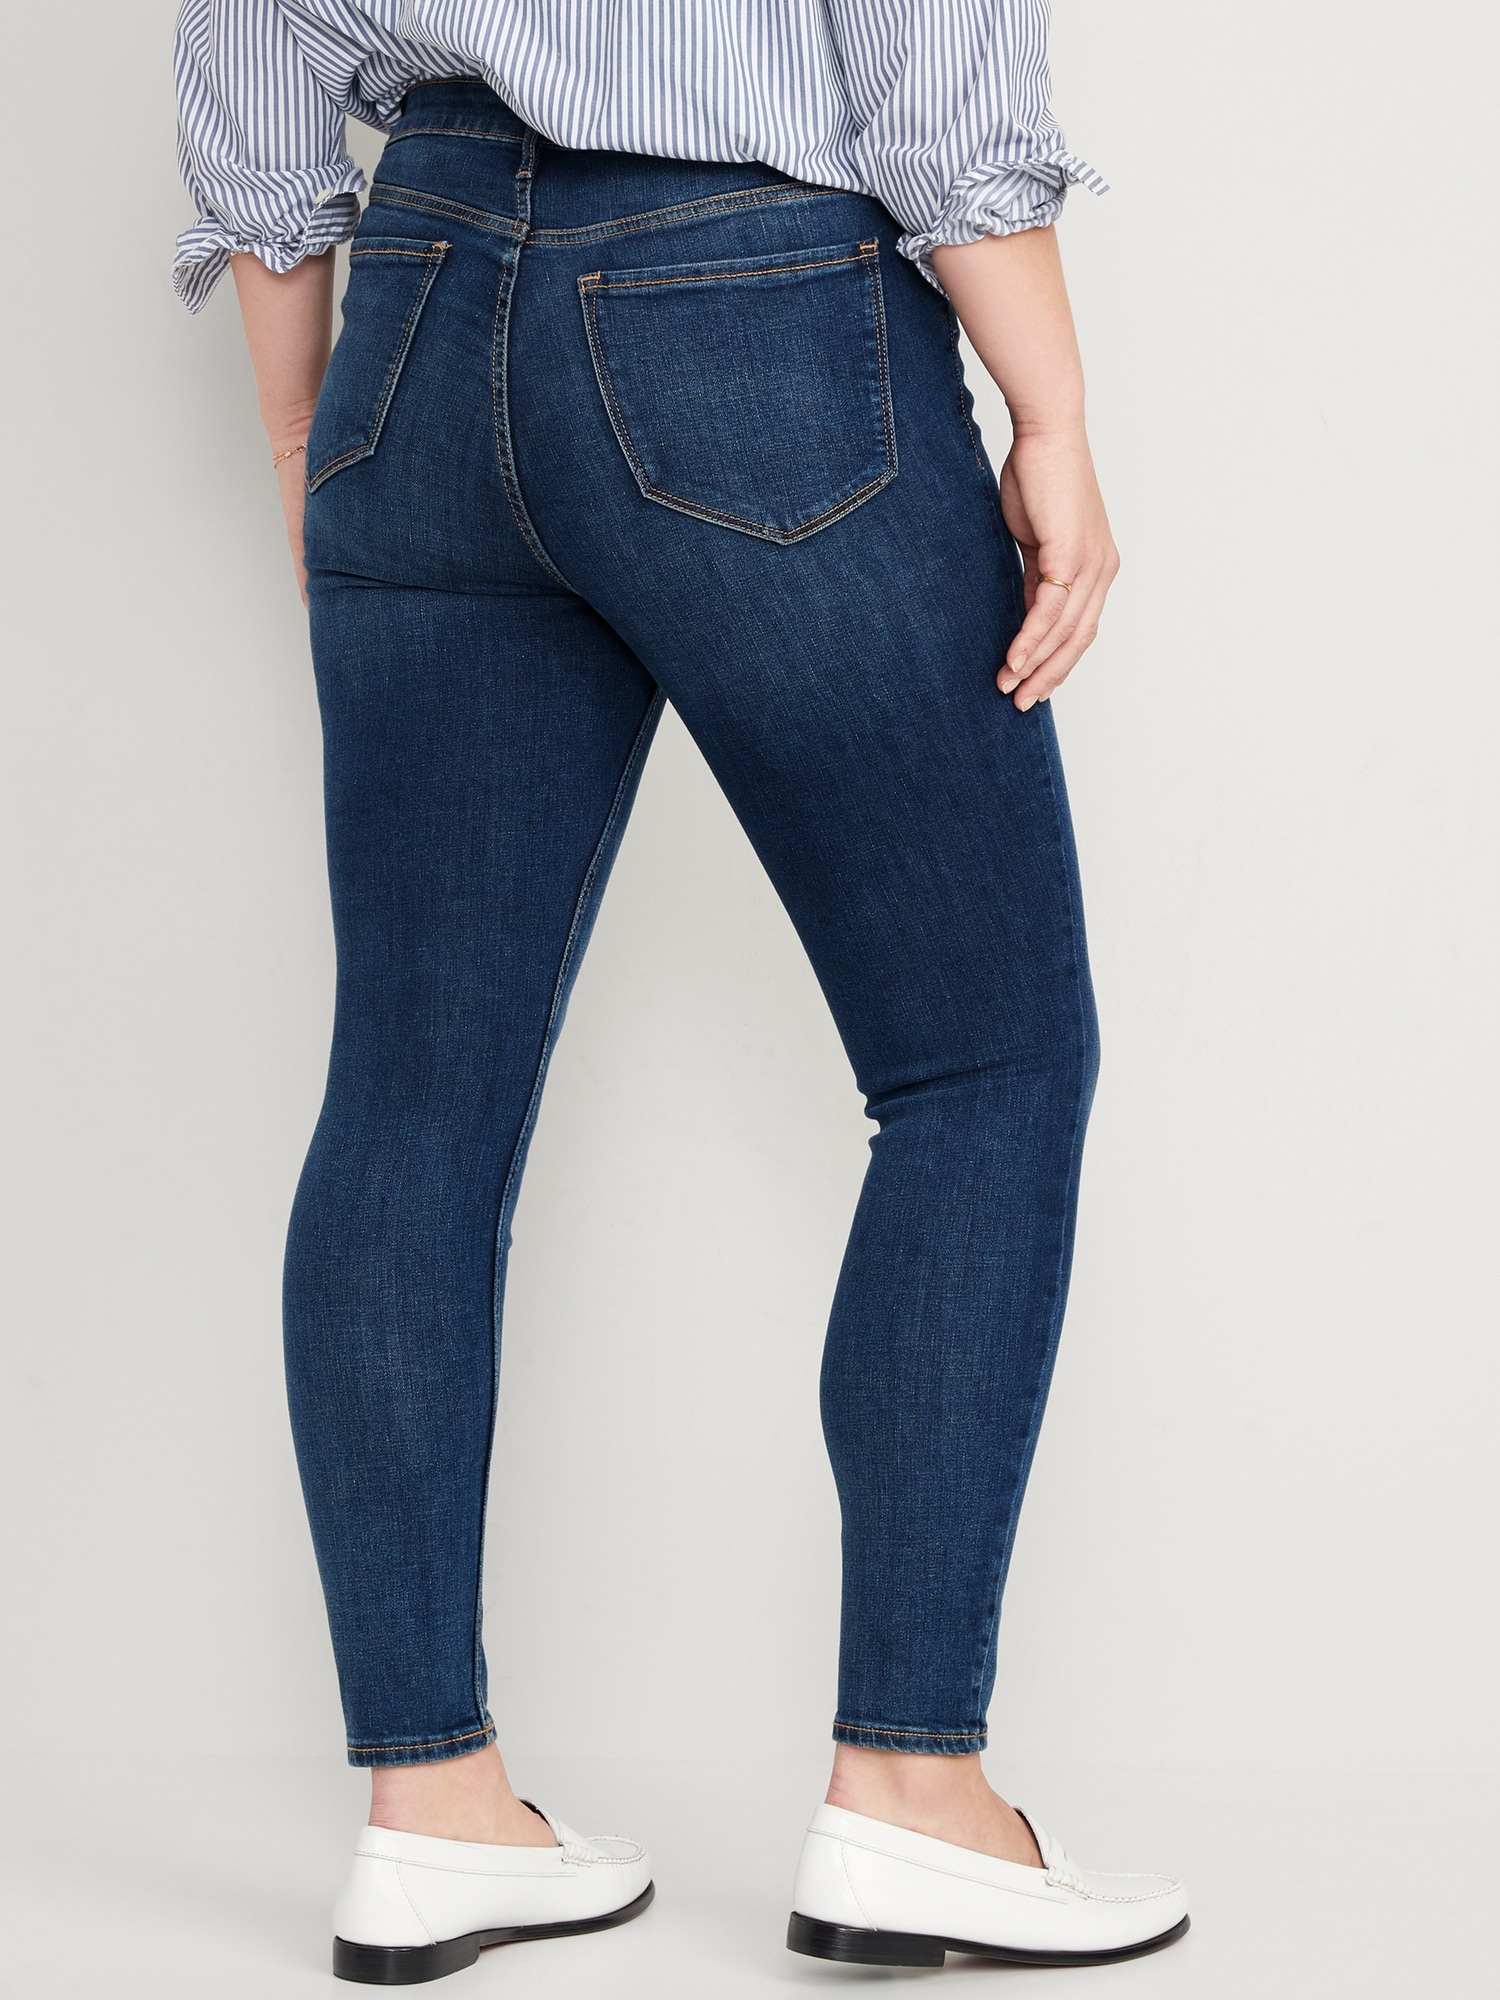 High-Waisted Rockstar Jeans for | Old Navy